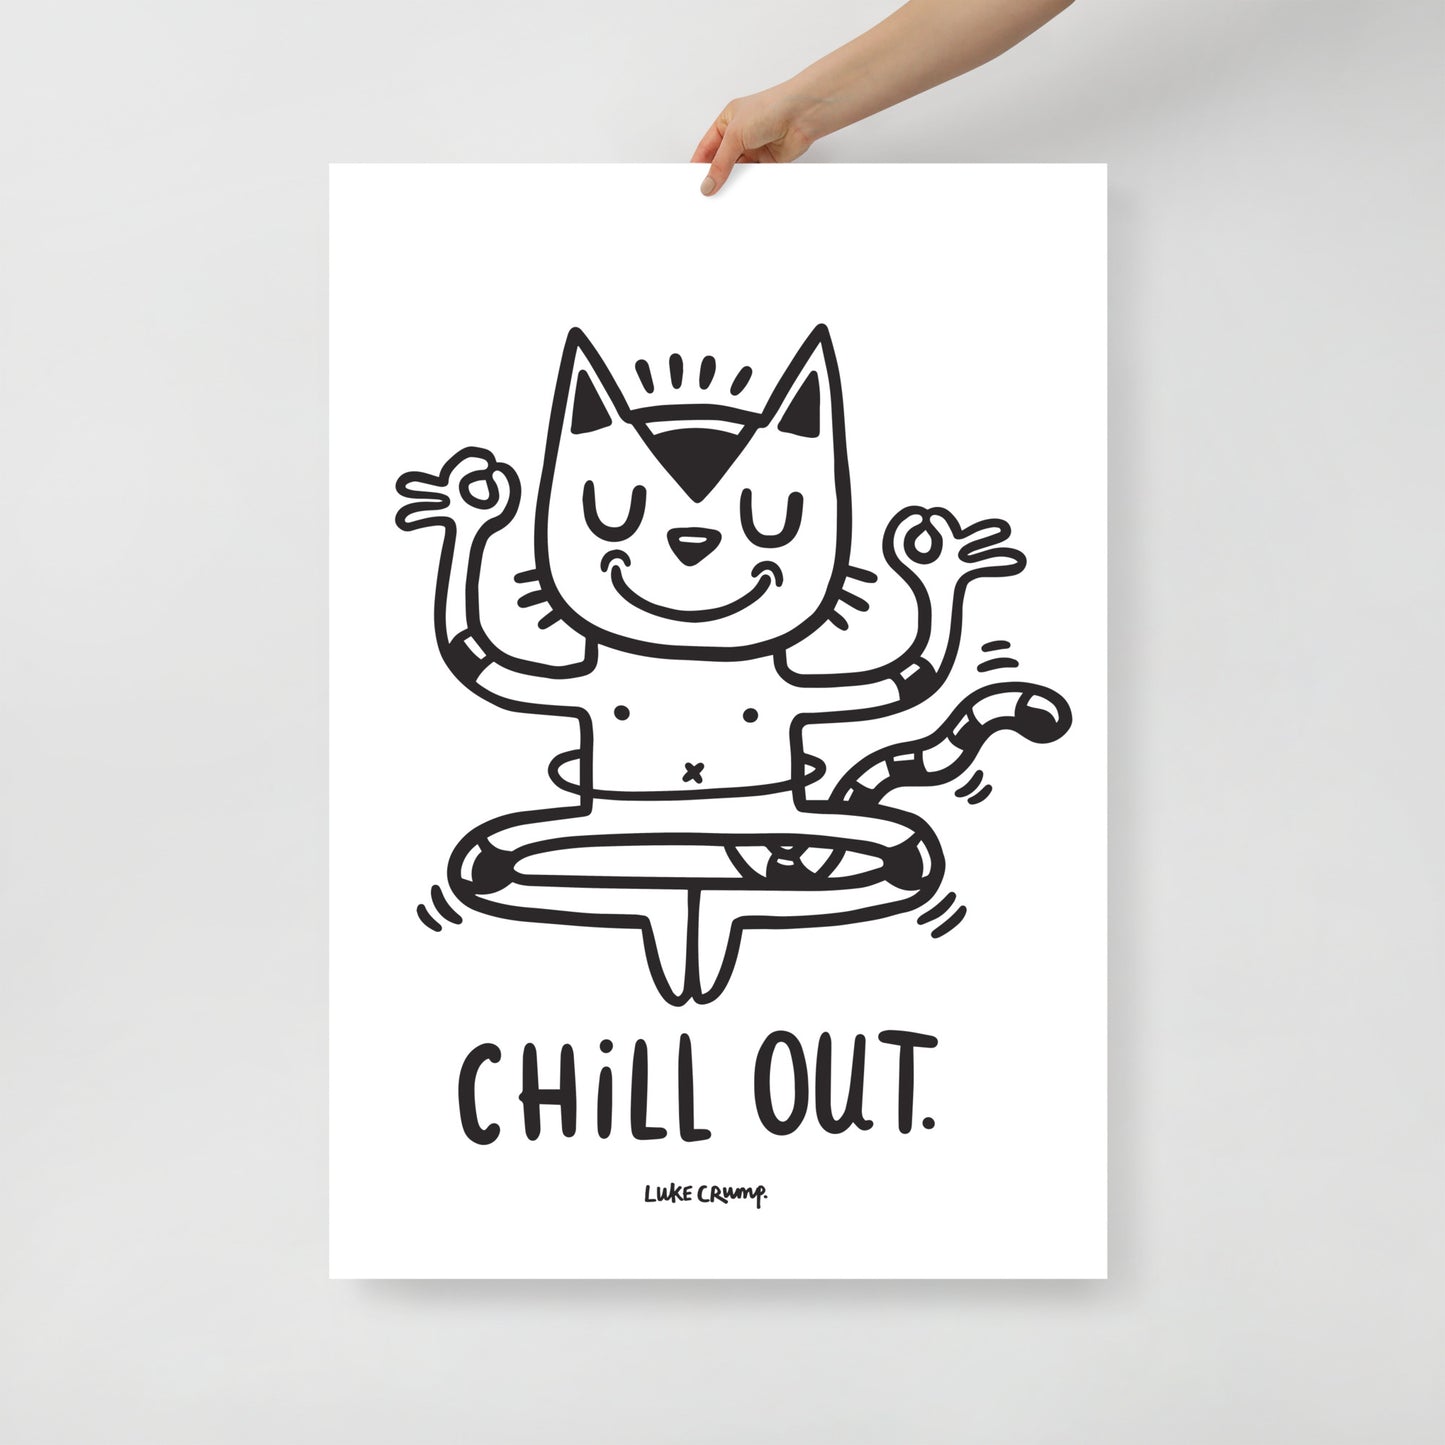 'Chill Out' Print